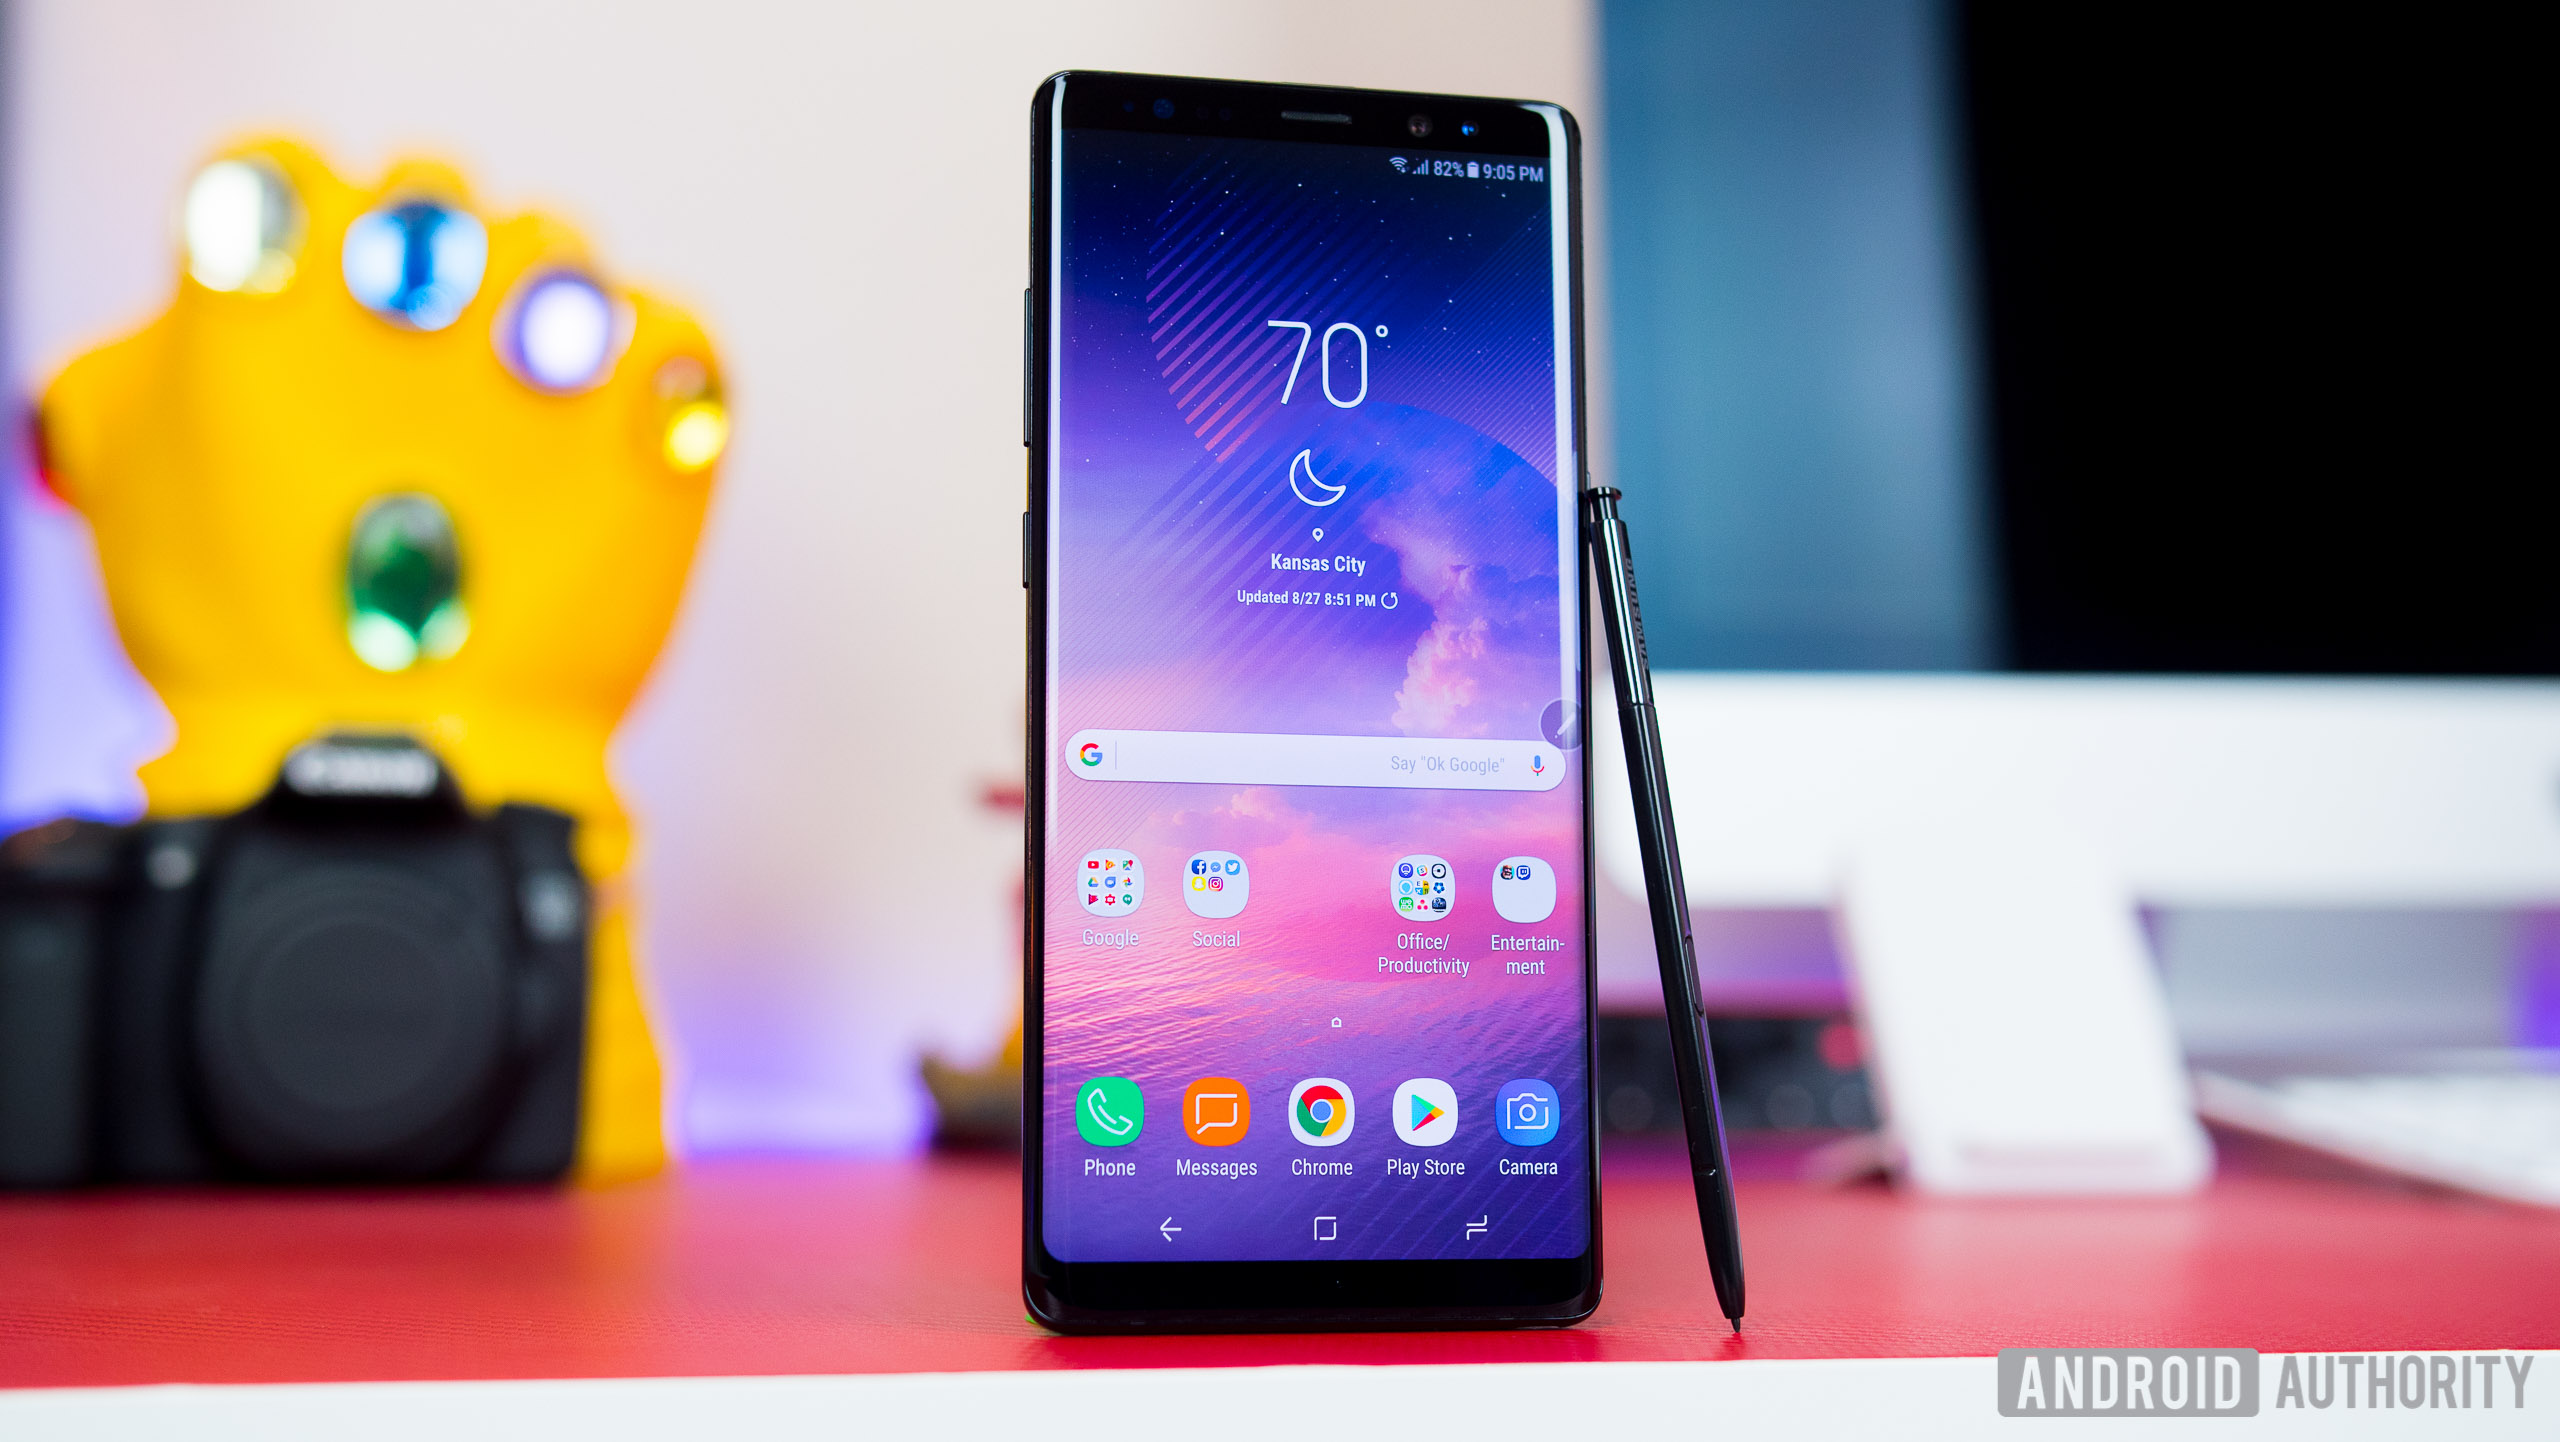 The Samsung Galaxy Note 8 standing on a table with its S Pen stylus leaning against it.